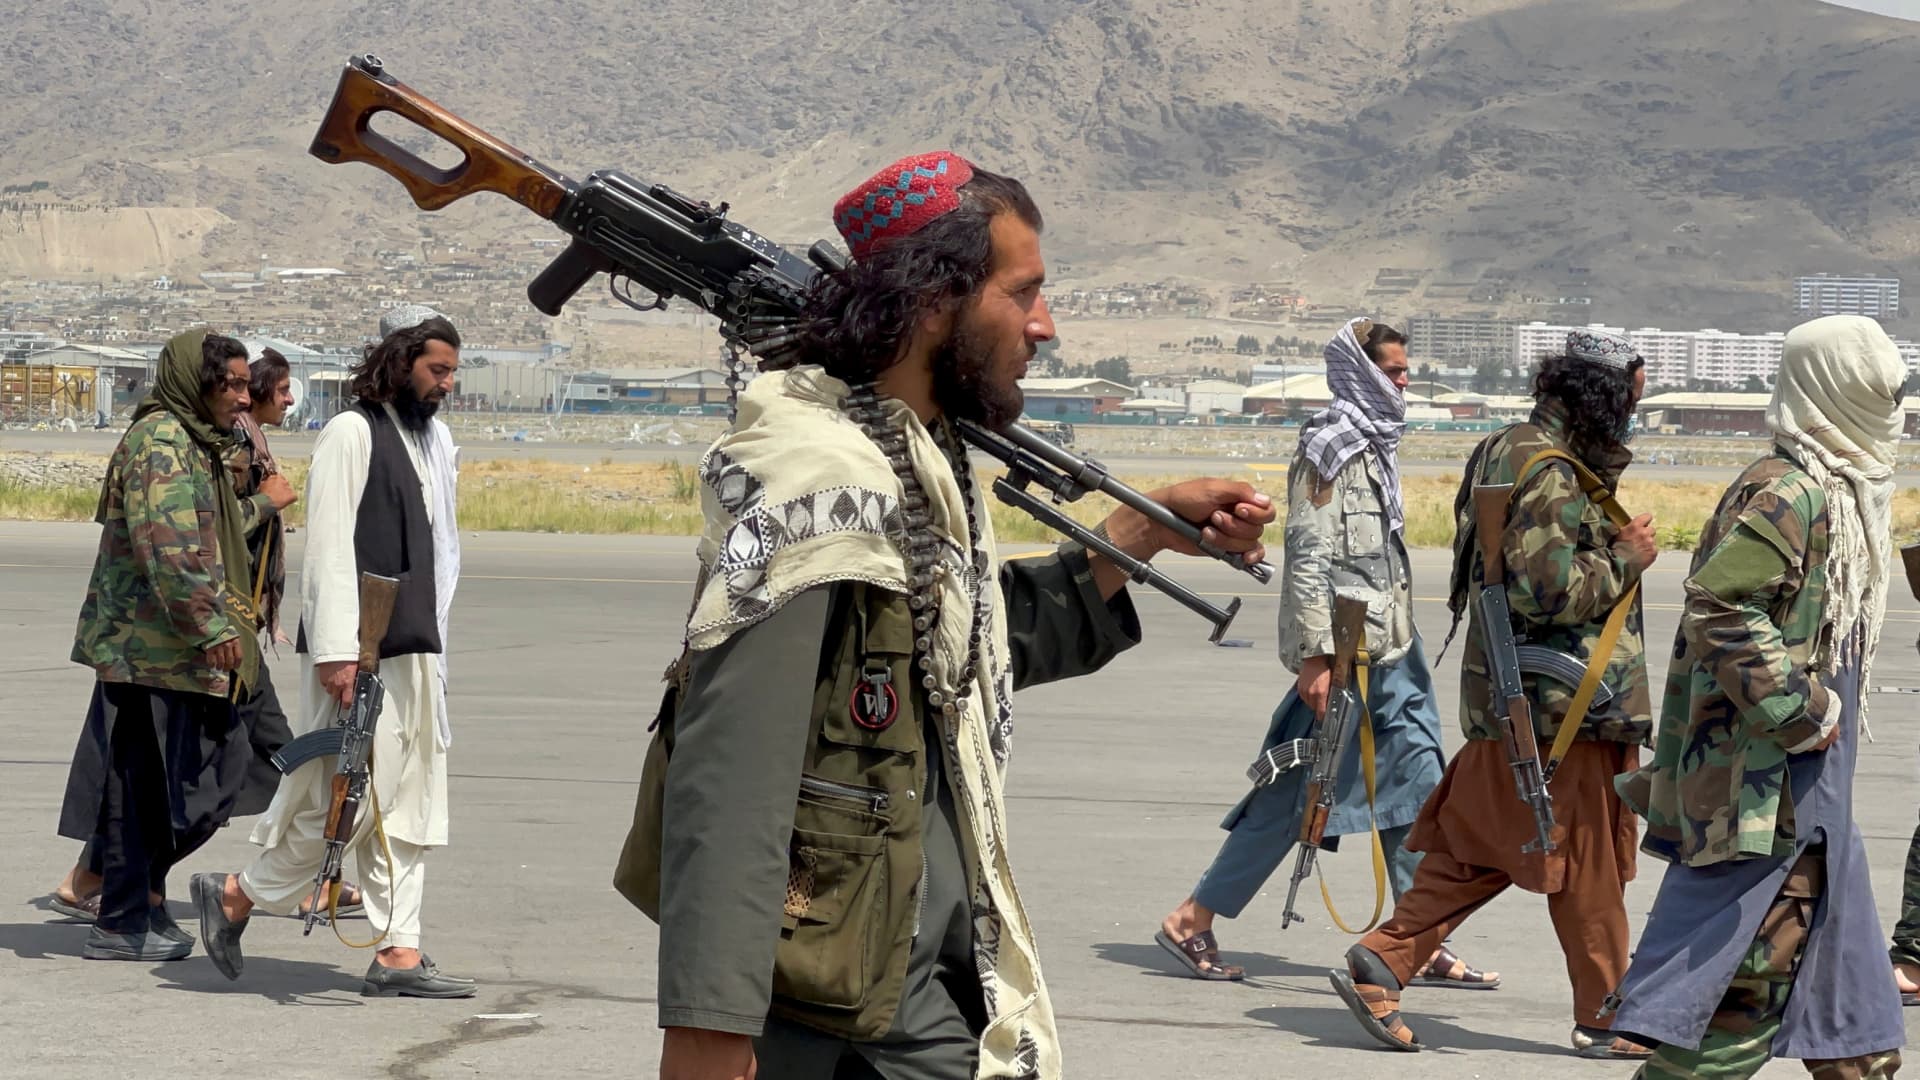 terrorism risk to increase under afghanistan's new taliban government: experts